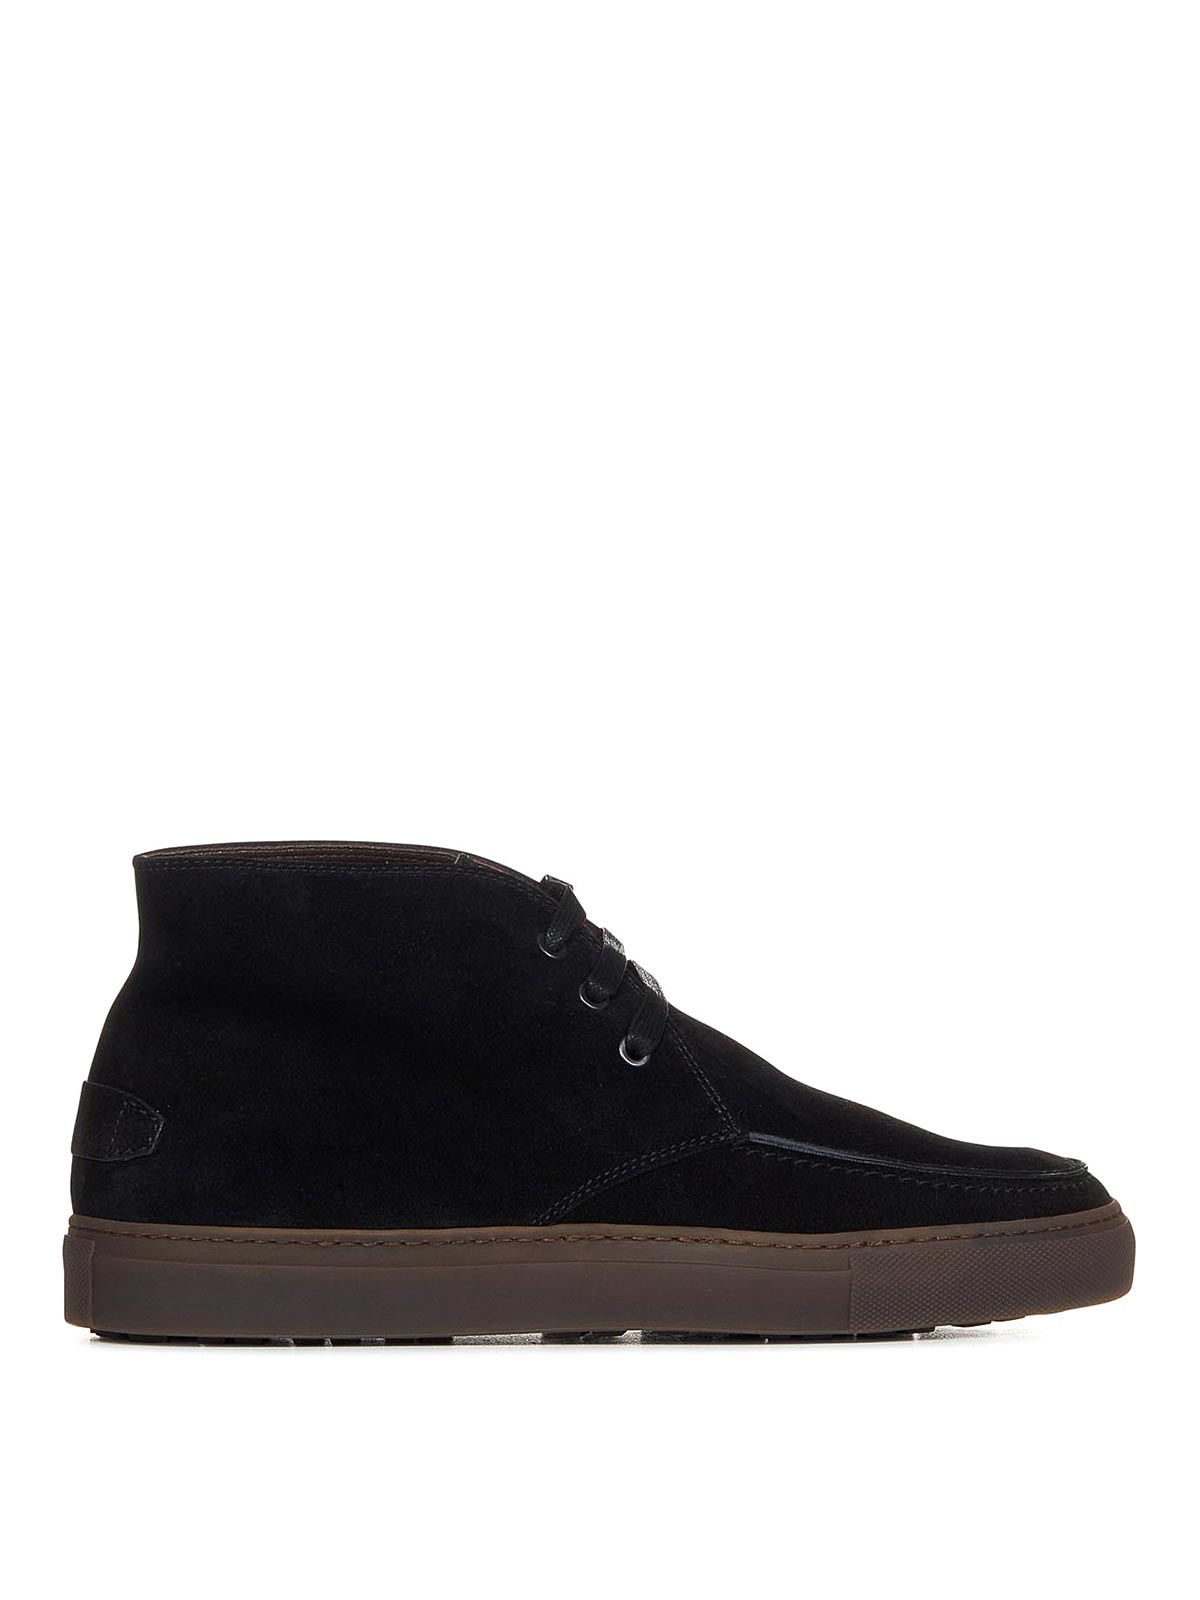 BRIONI BLACK SUEDE ANKLE BOOTS